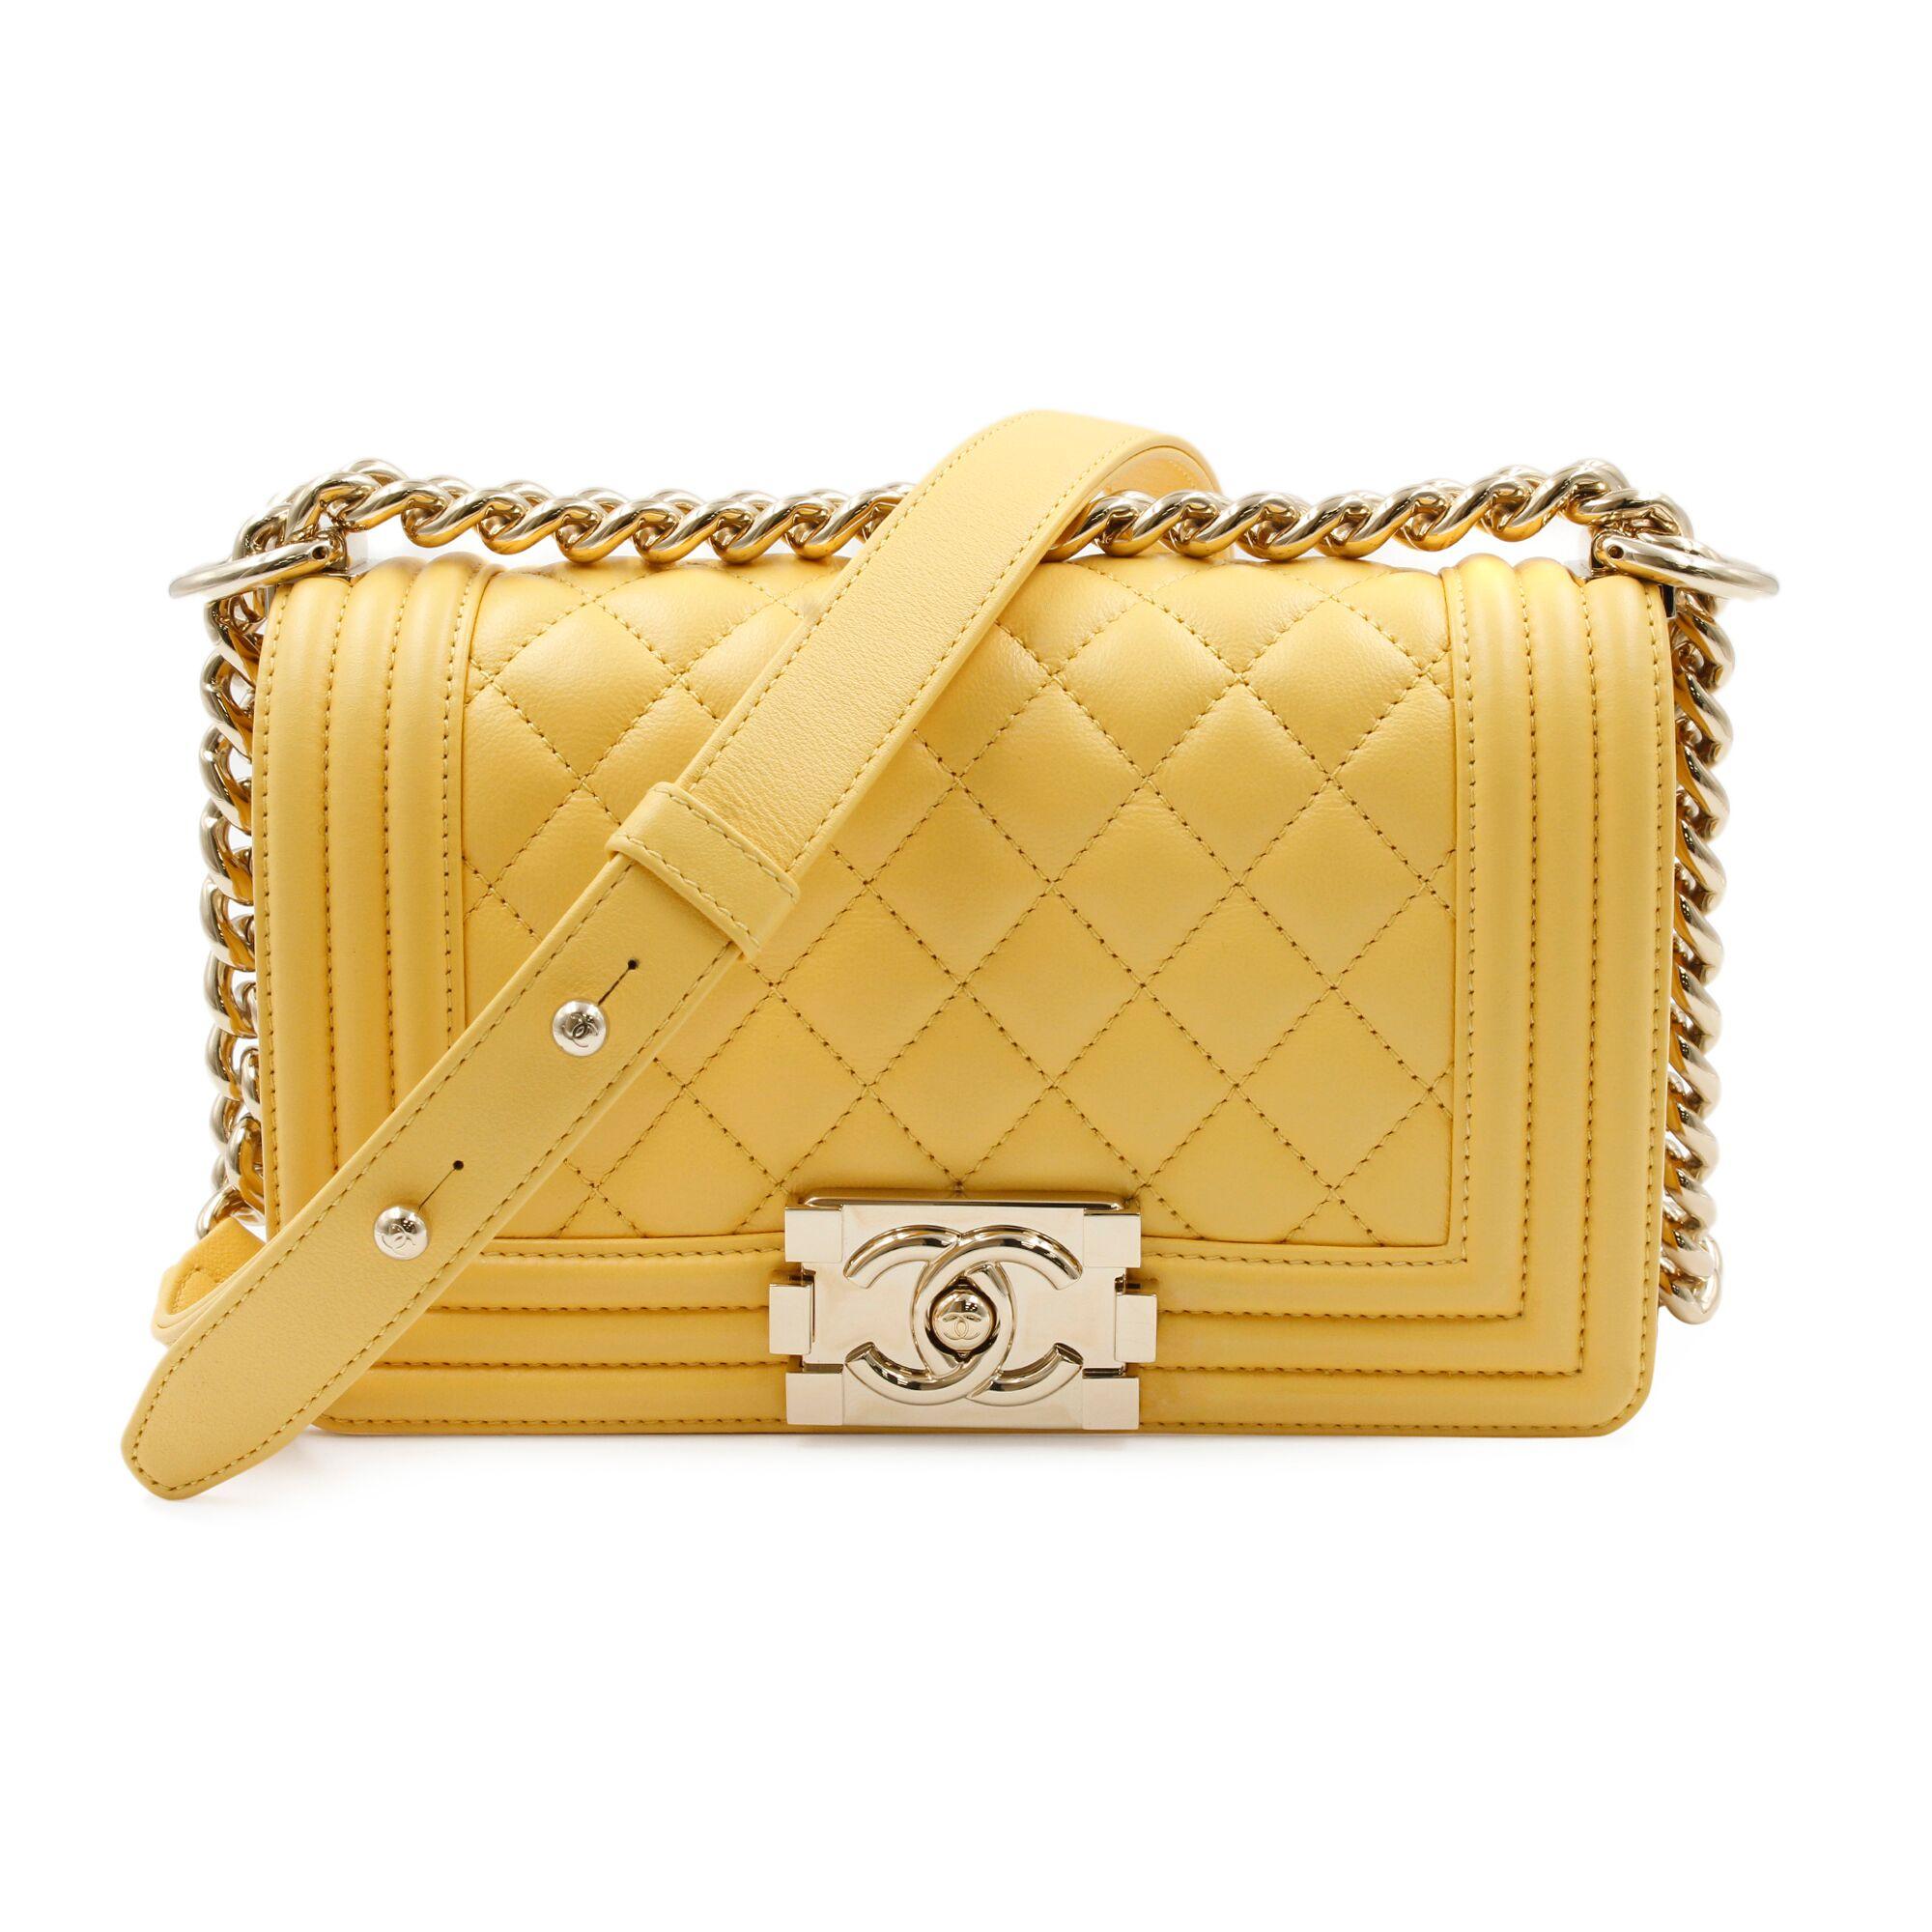 Chanel Boy Flap Bag Quilted Lambskin Small is every woman's dream. Crafted from yellow quilted lambskin leather. This Boy flap bag features a chunky chain link strap with shoulder pad, CC Boy logo push-lock closure, and gold-tone hardware accents.